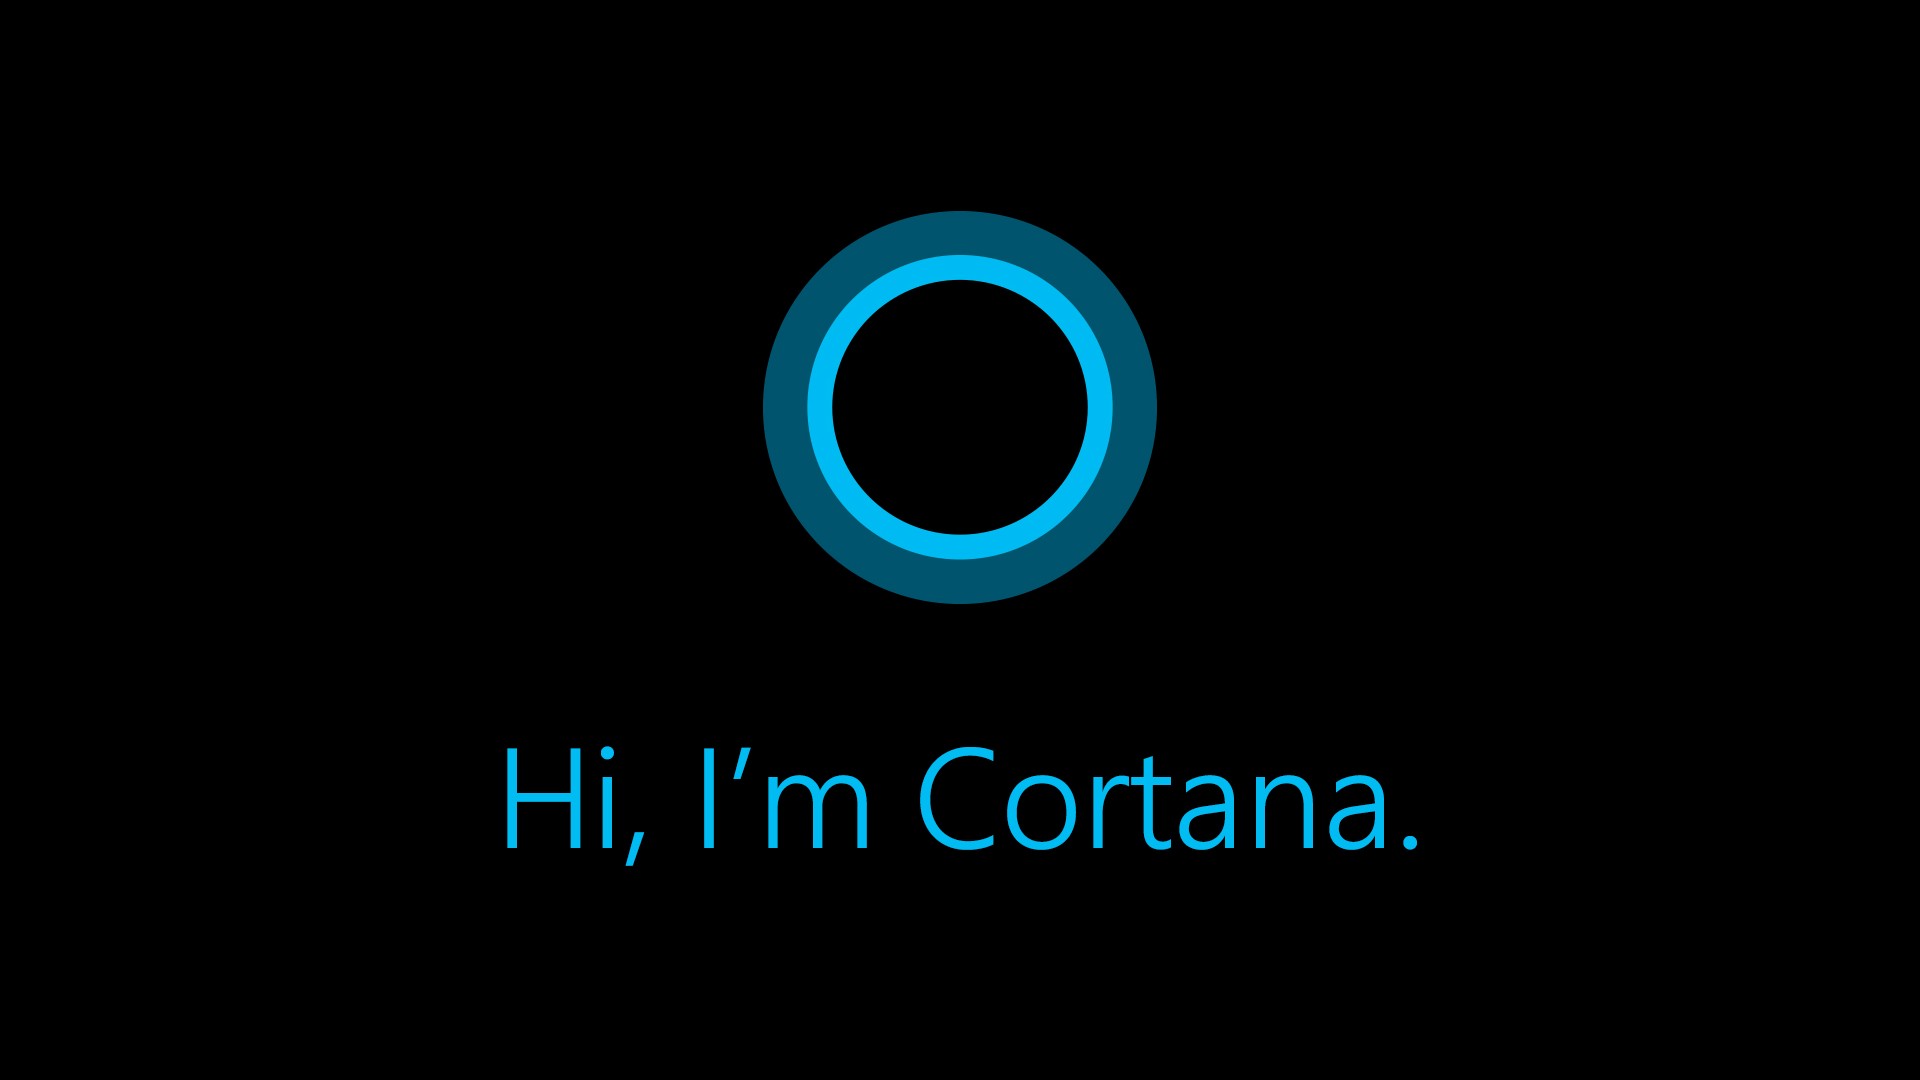 Goodbye Cortana: Microsoft confirms that the assistant will likely be discontinued in Home windows 10 and 11